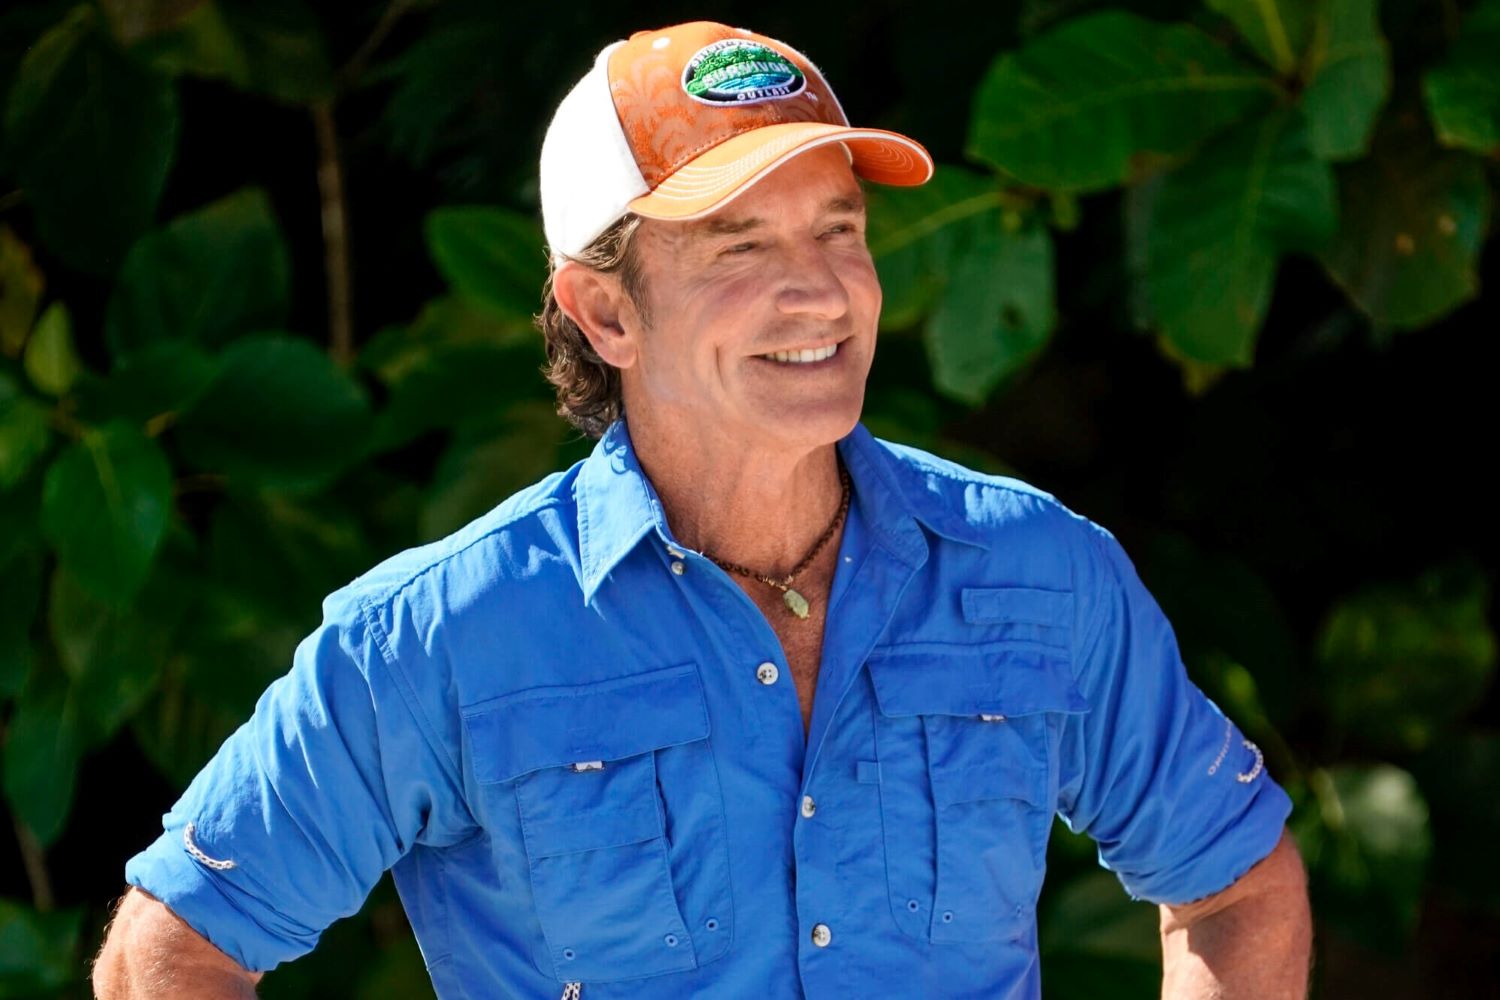 Jeff Probst, the host of 'Survivor' Season 44, which premieres tonight, wears a blue button-up shirt with rolled-up sleeves and an orange and white 'Survivor' baseball cap.